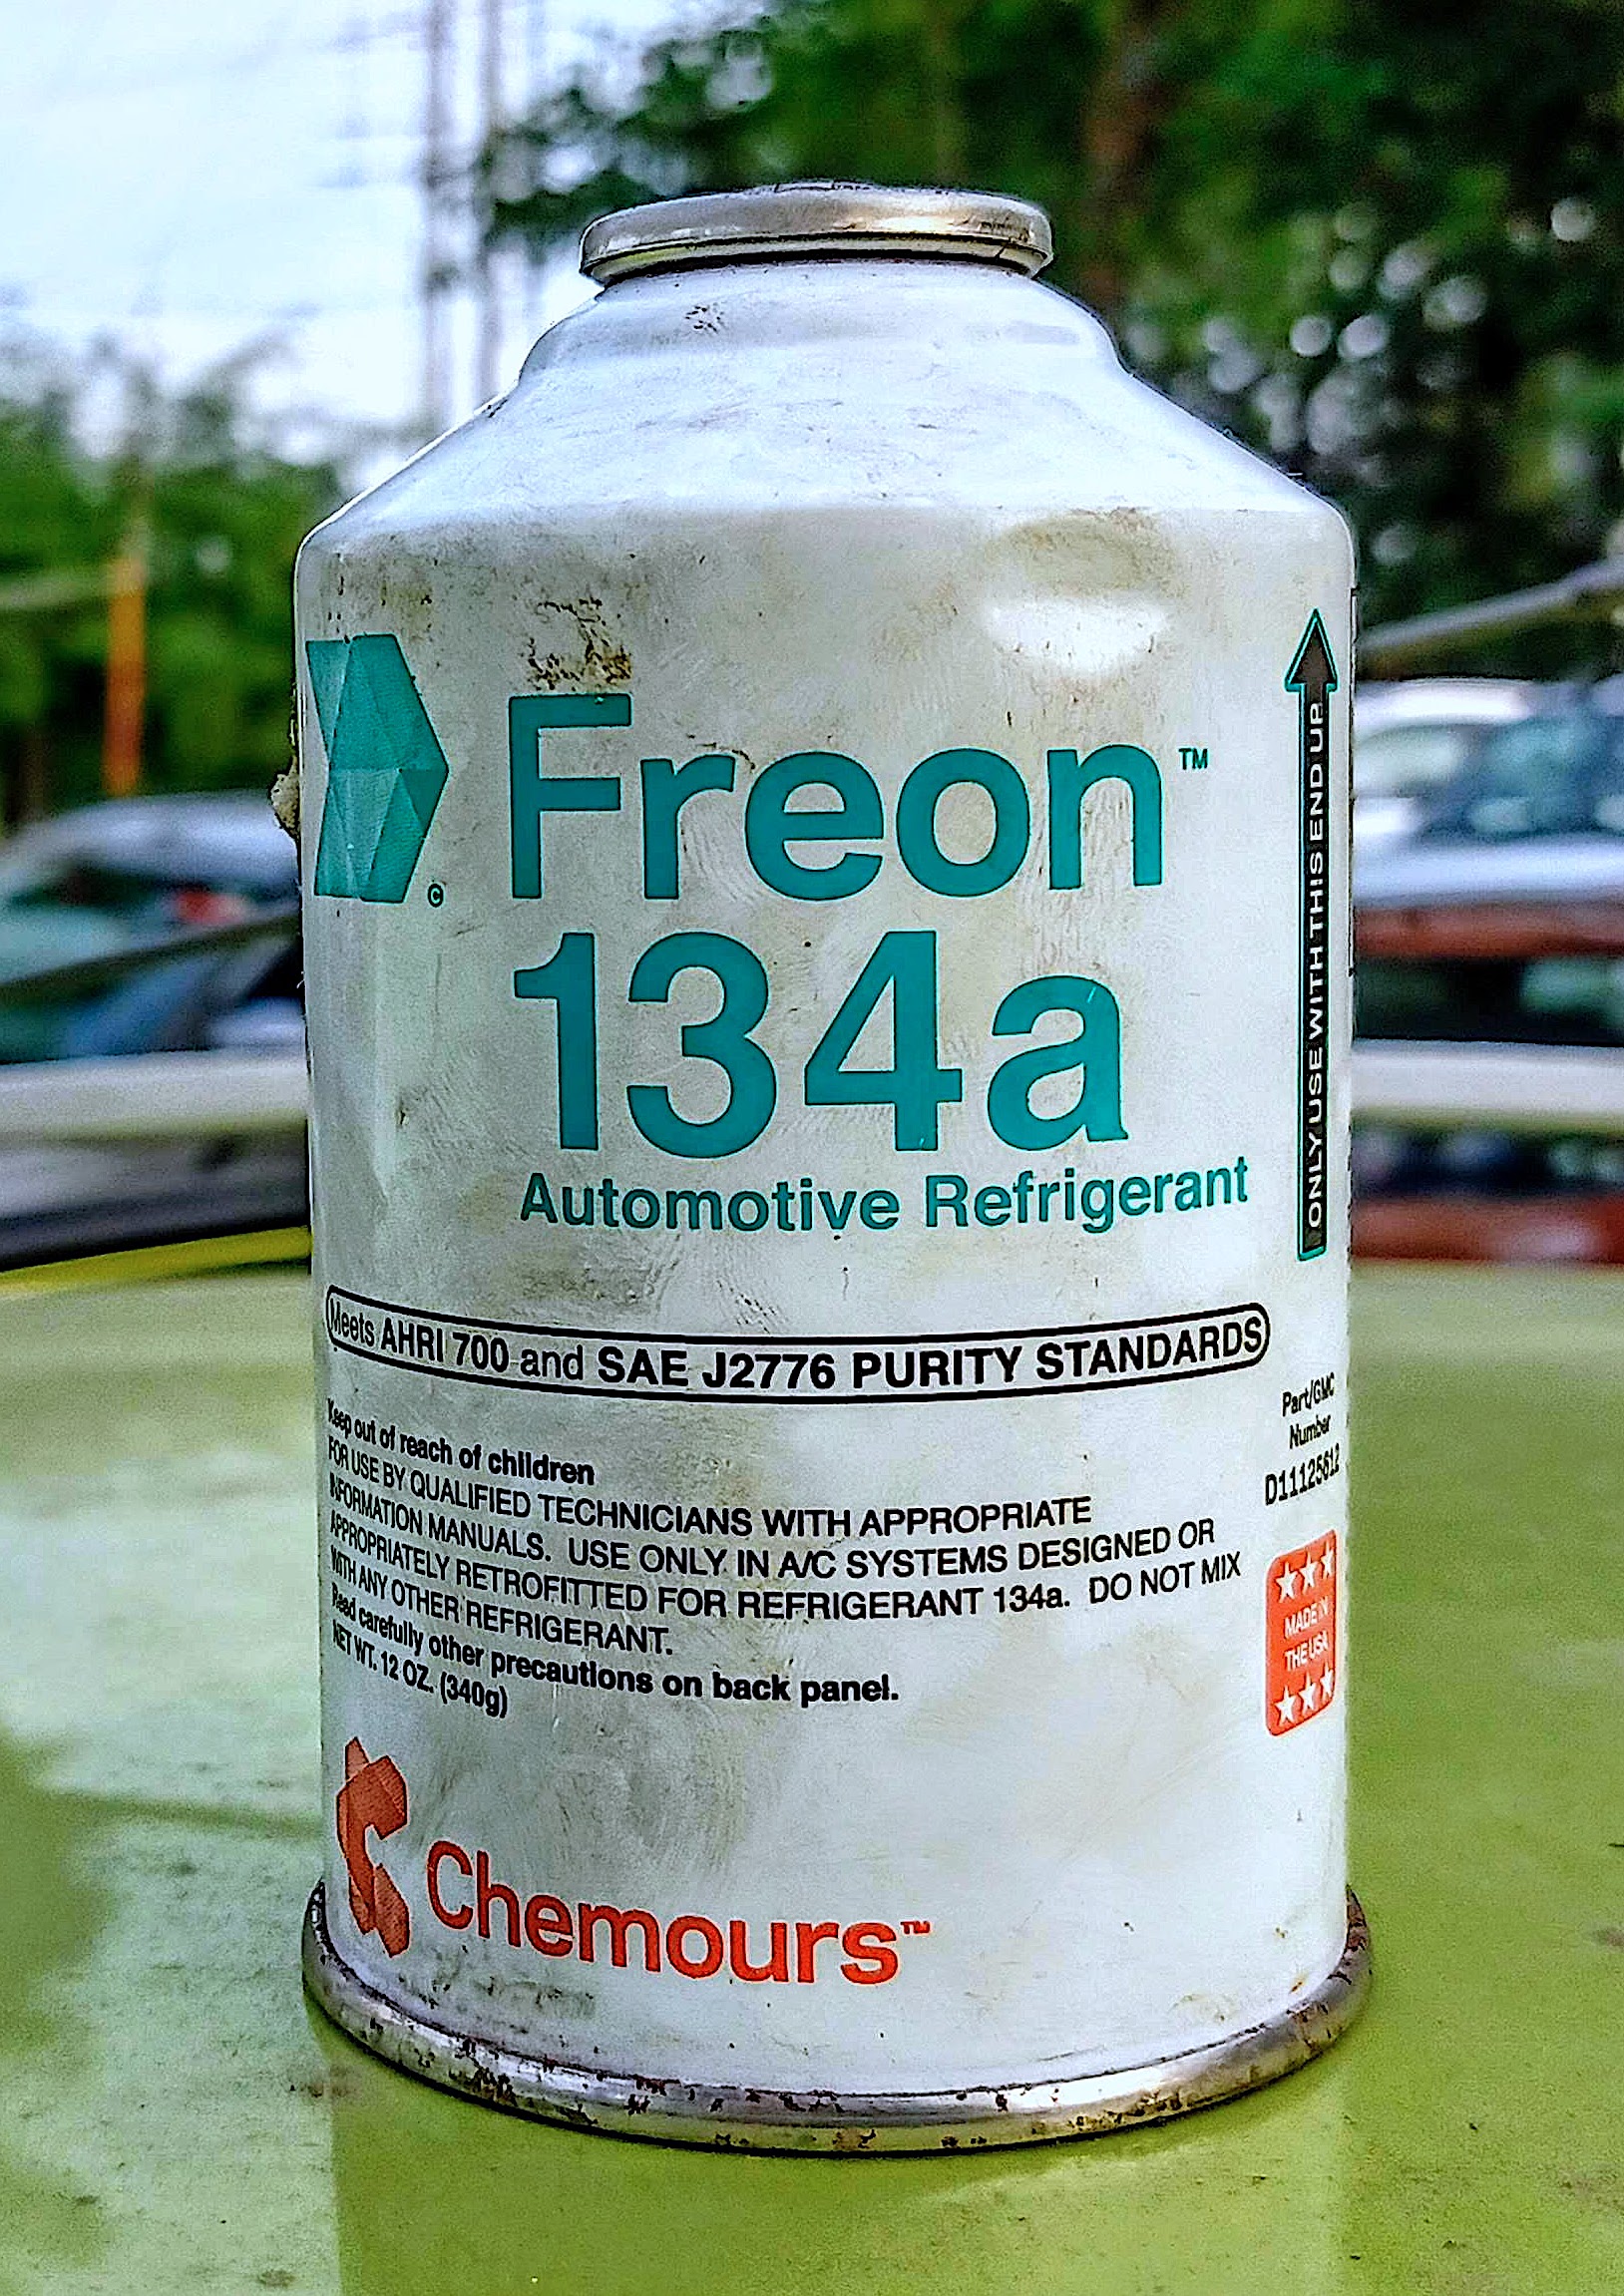 A can of Freon 134a, an automotive refrigerant produced by Chemours.